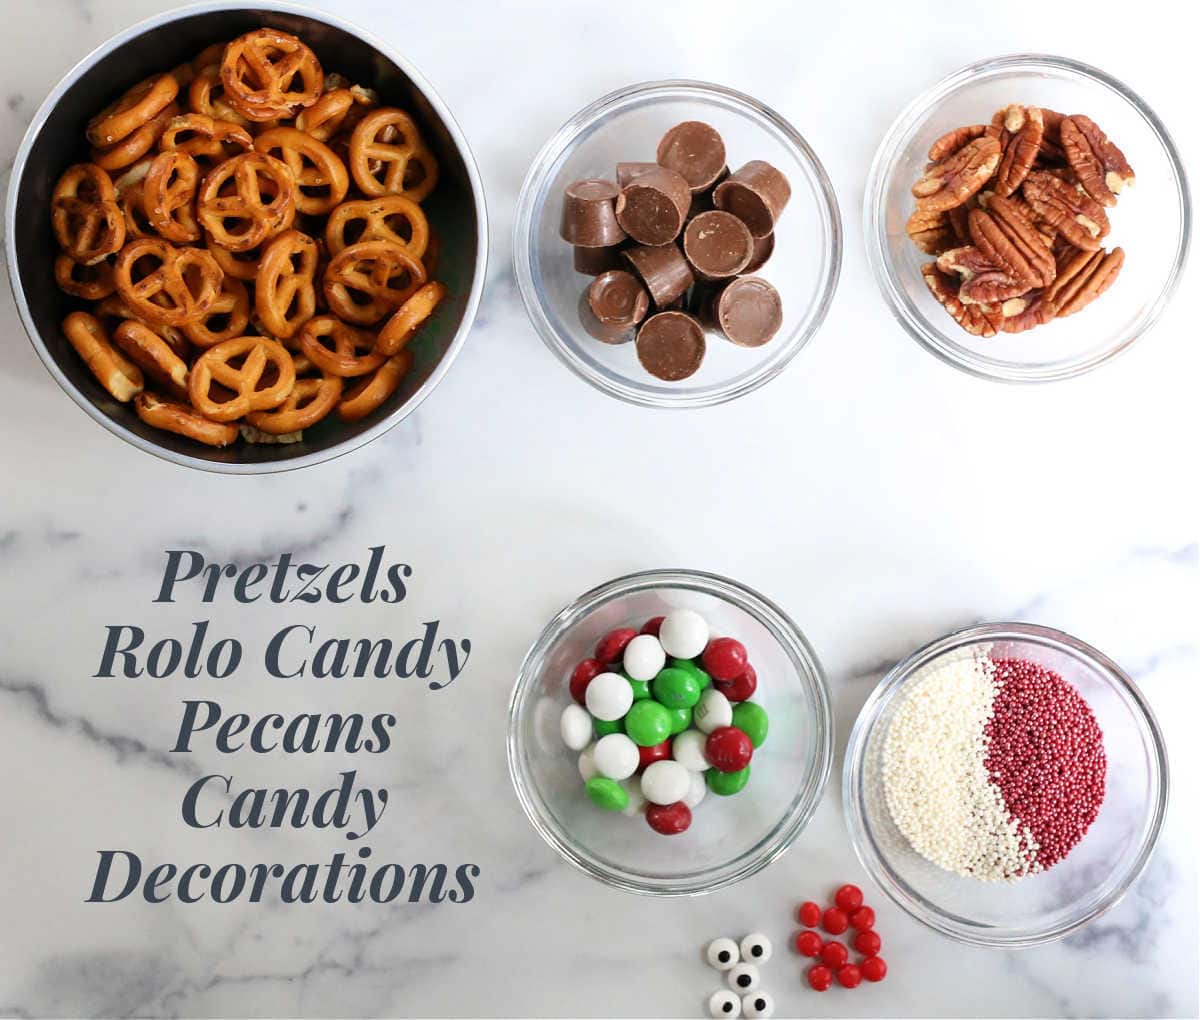 ingredients to make caramel chocolate pretzels out of rolo candy